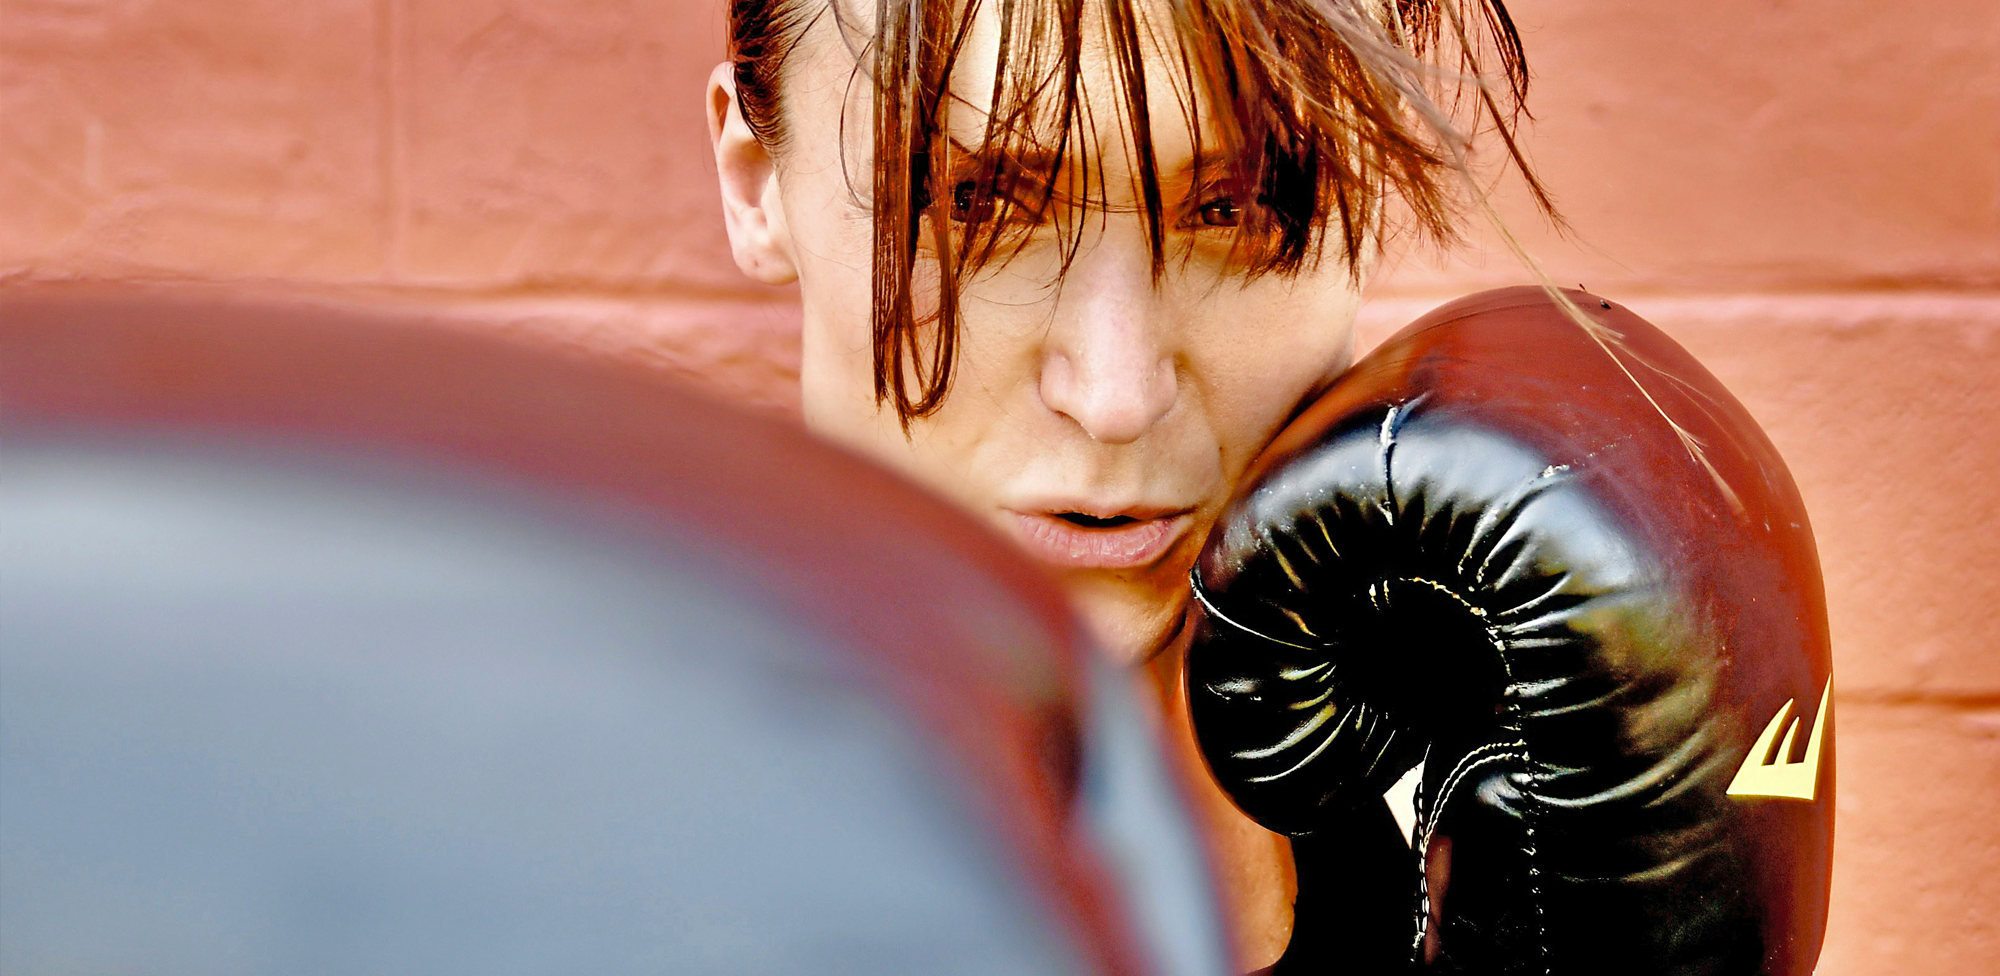 Close up on woman wearing black boxing gloves throwing punches during training